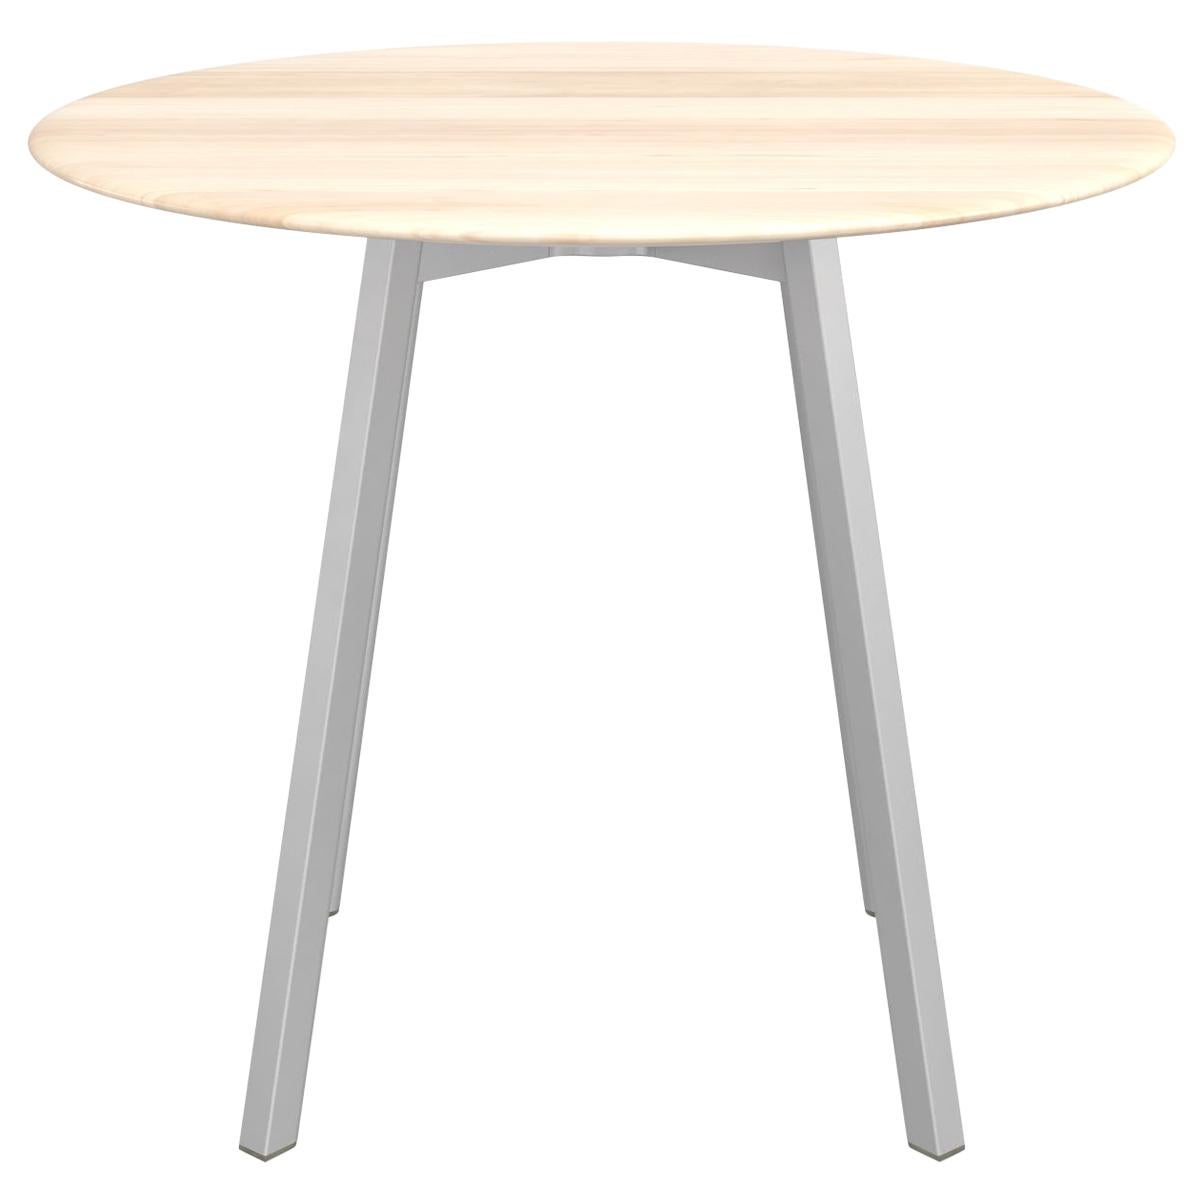 Emeco Su Large Round Cafe Table with Anodized Aluminum Frame & Wood Top by Nendo